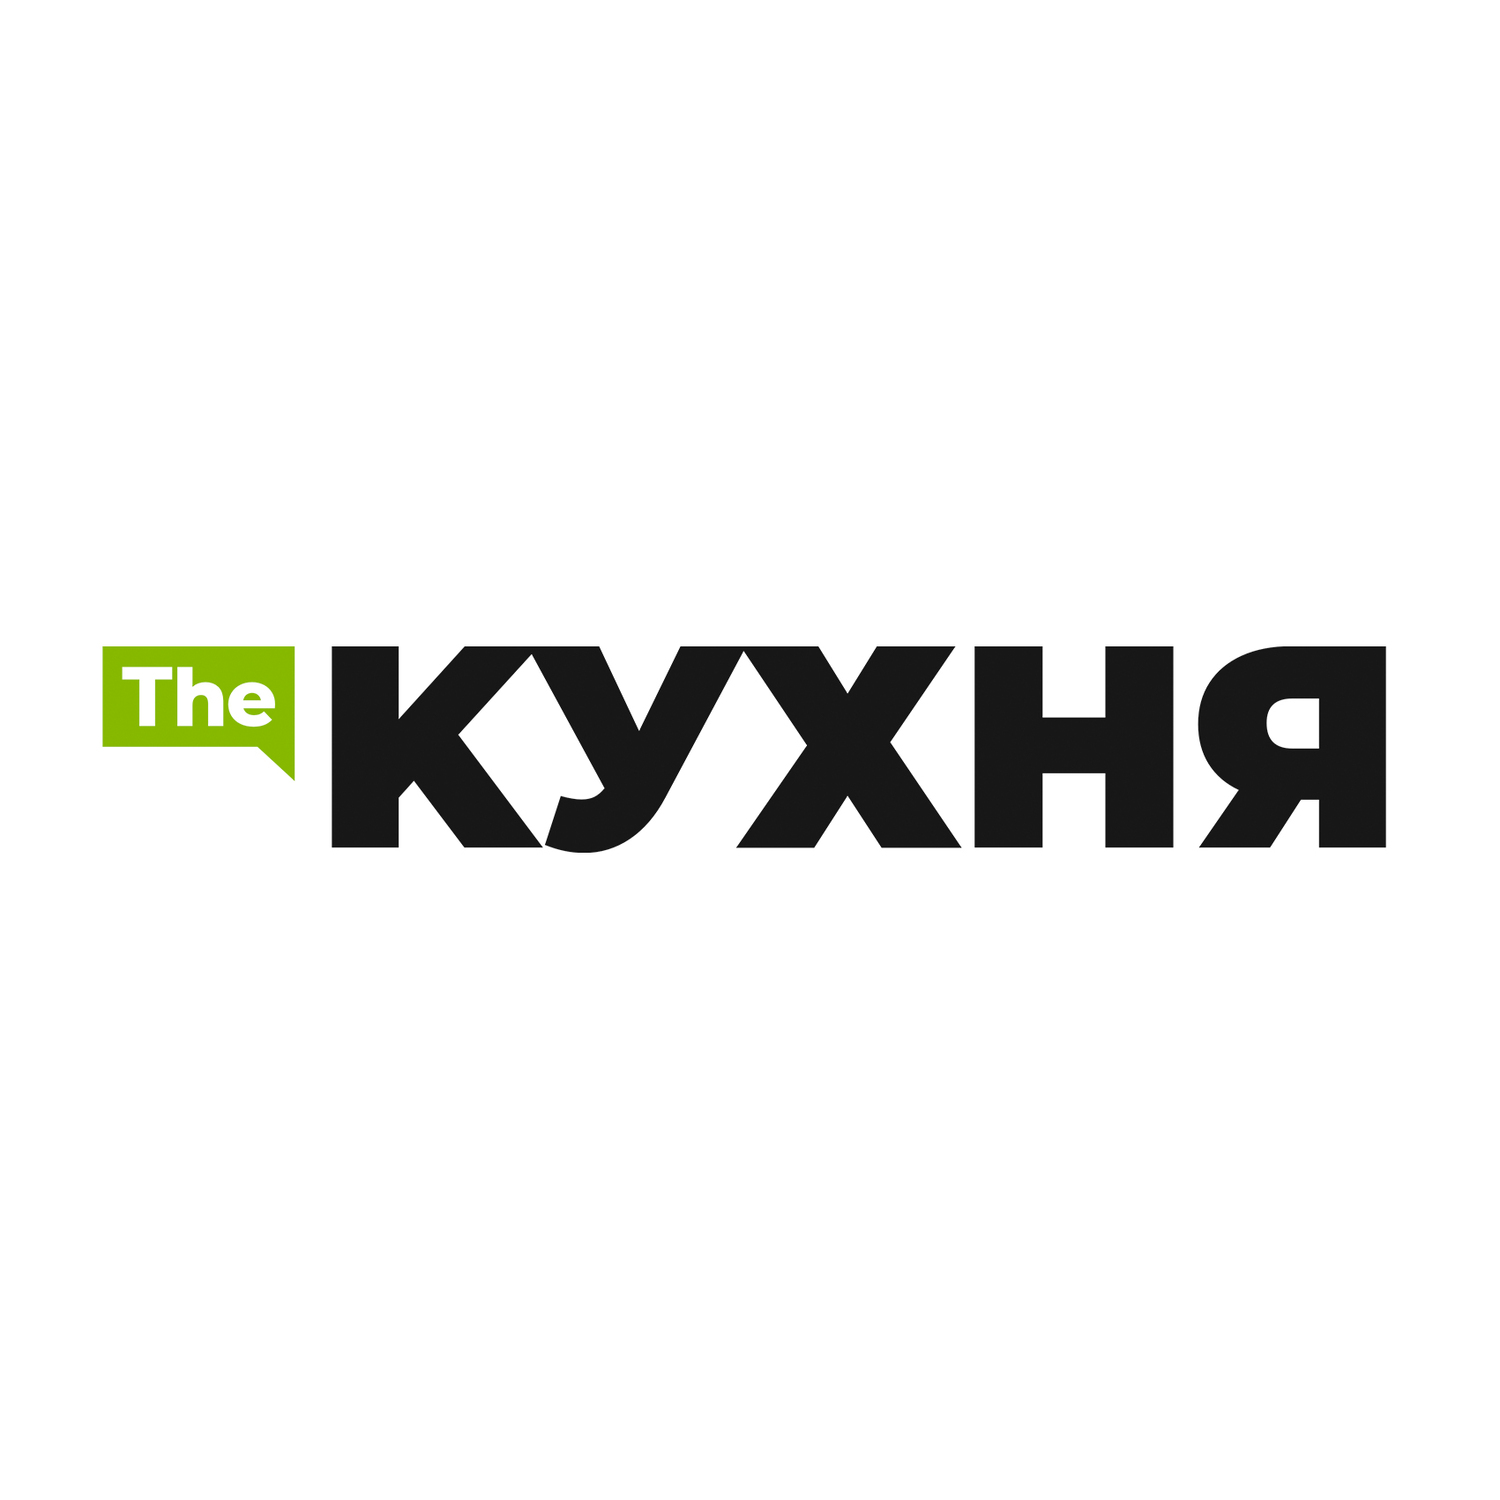 <span style="font-weight: bold;">The КУХНЯ&nbsp;</span>